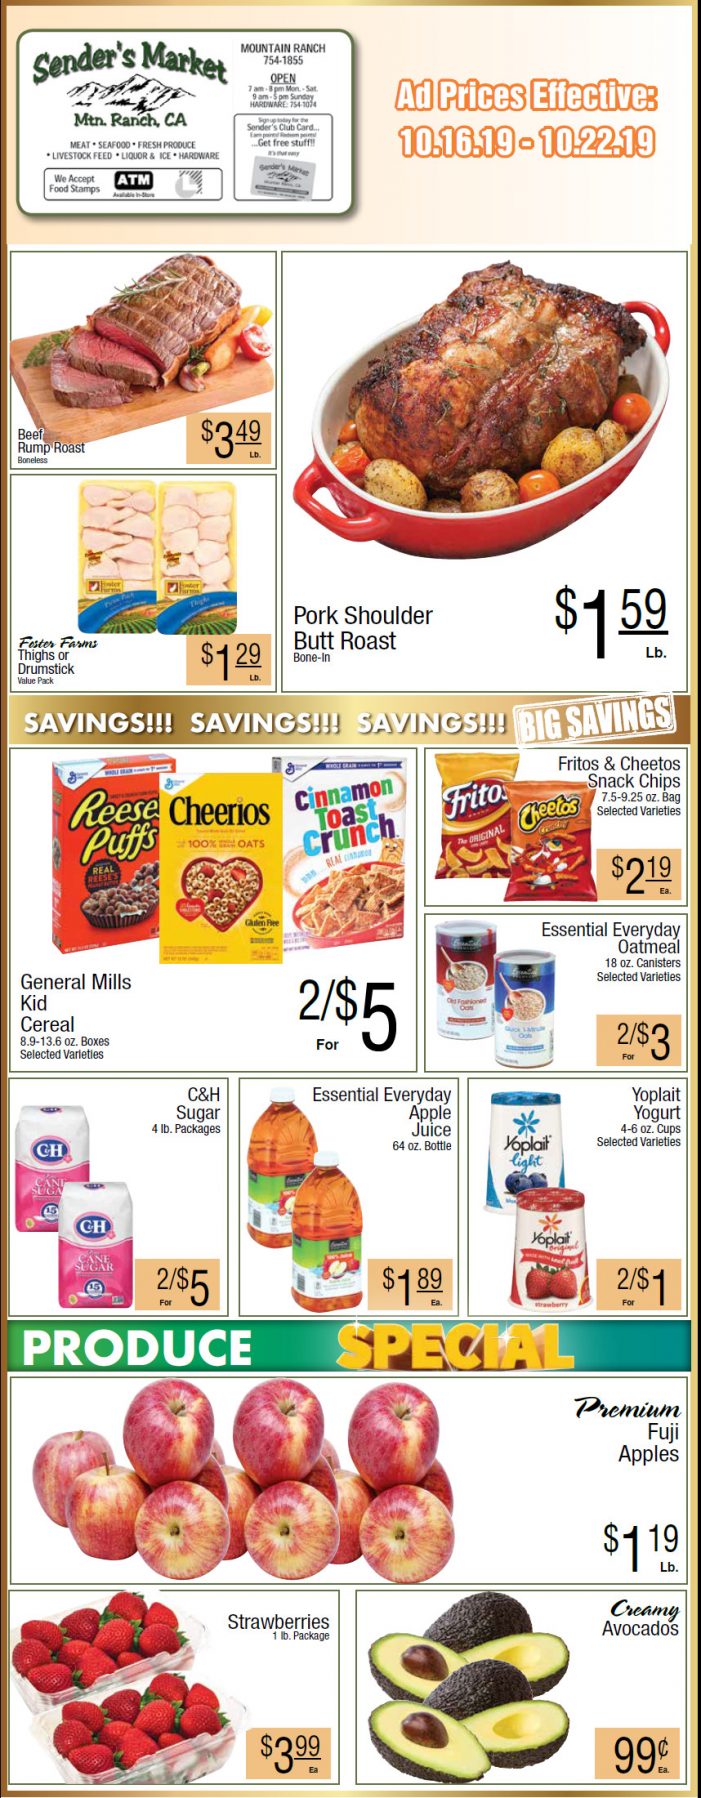 Sender’s Market Weekly Ads & Grocery Specials Through October 22nd!